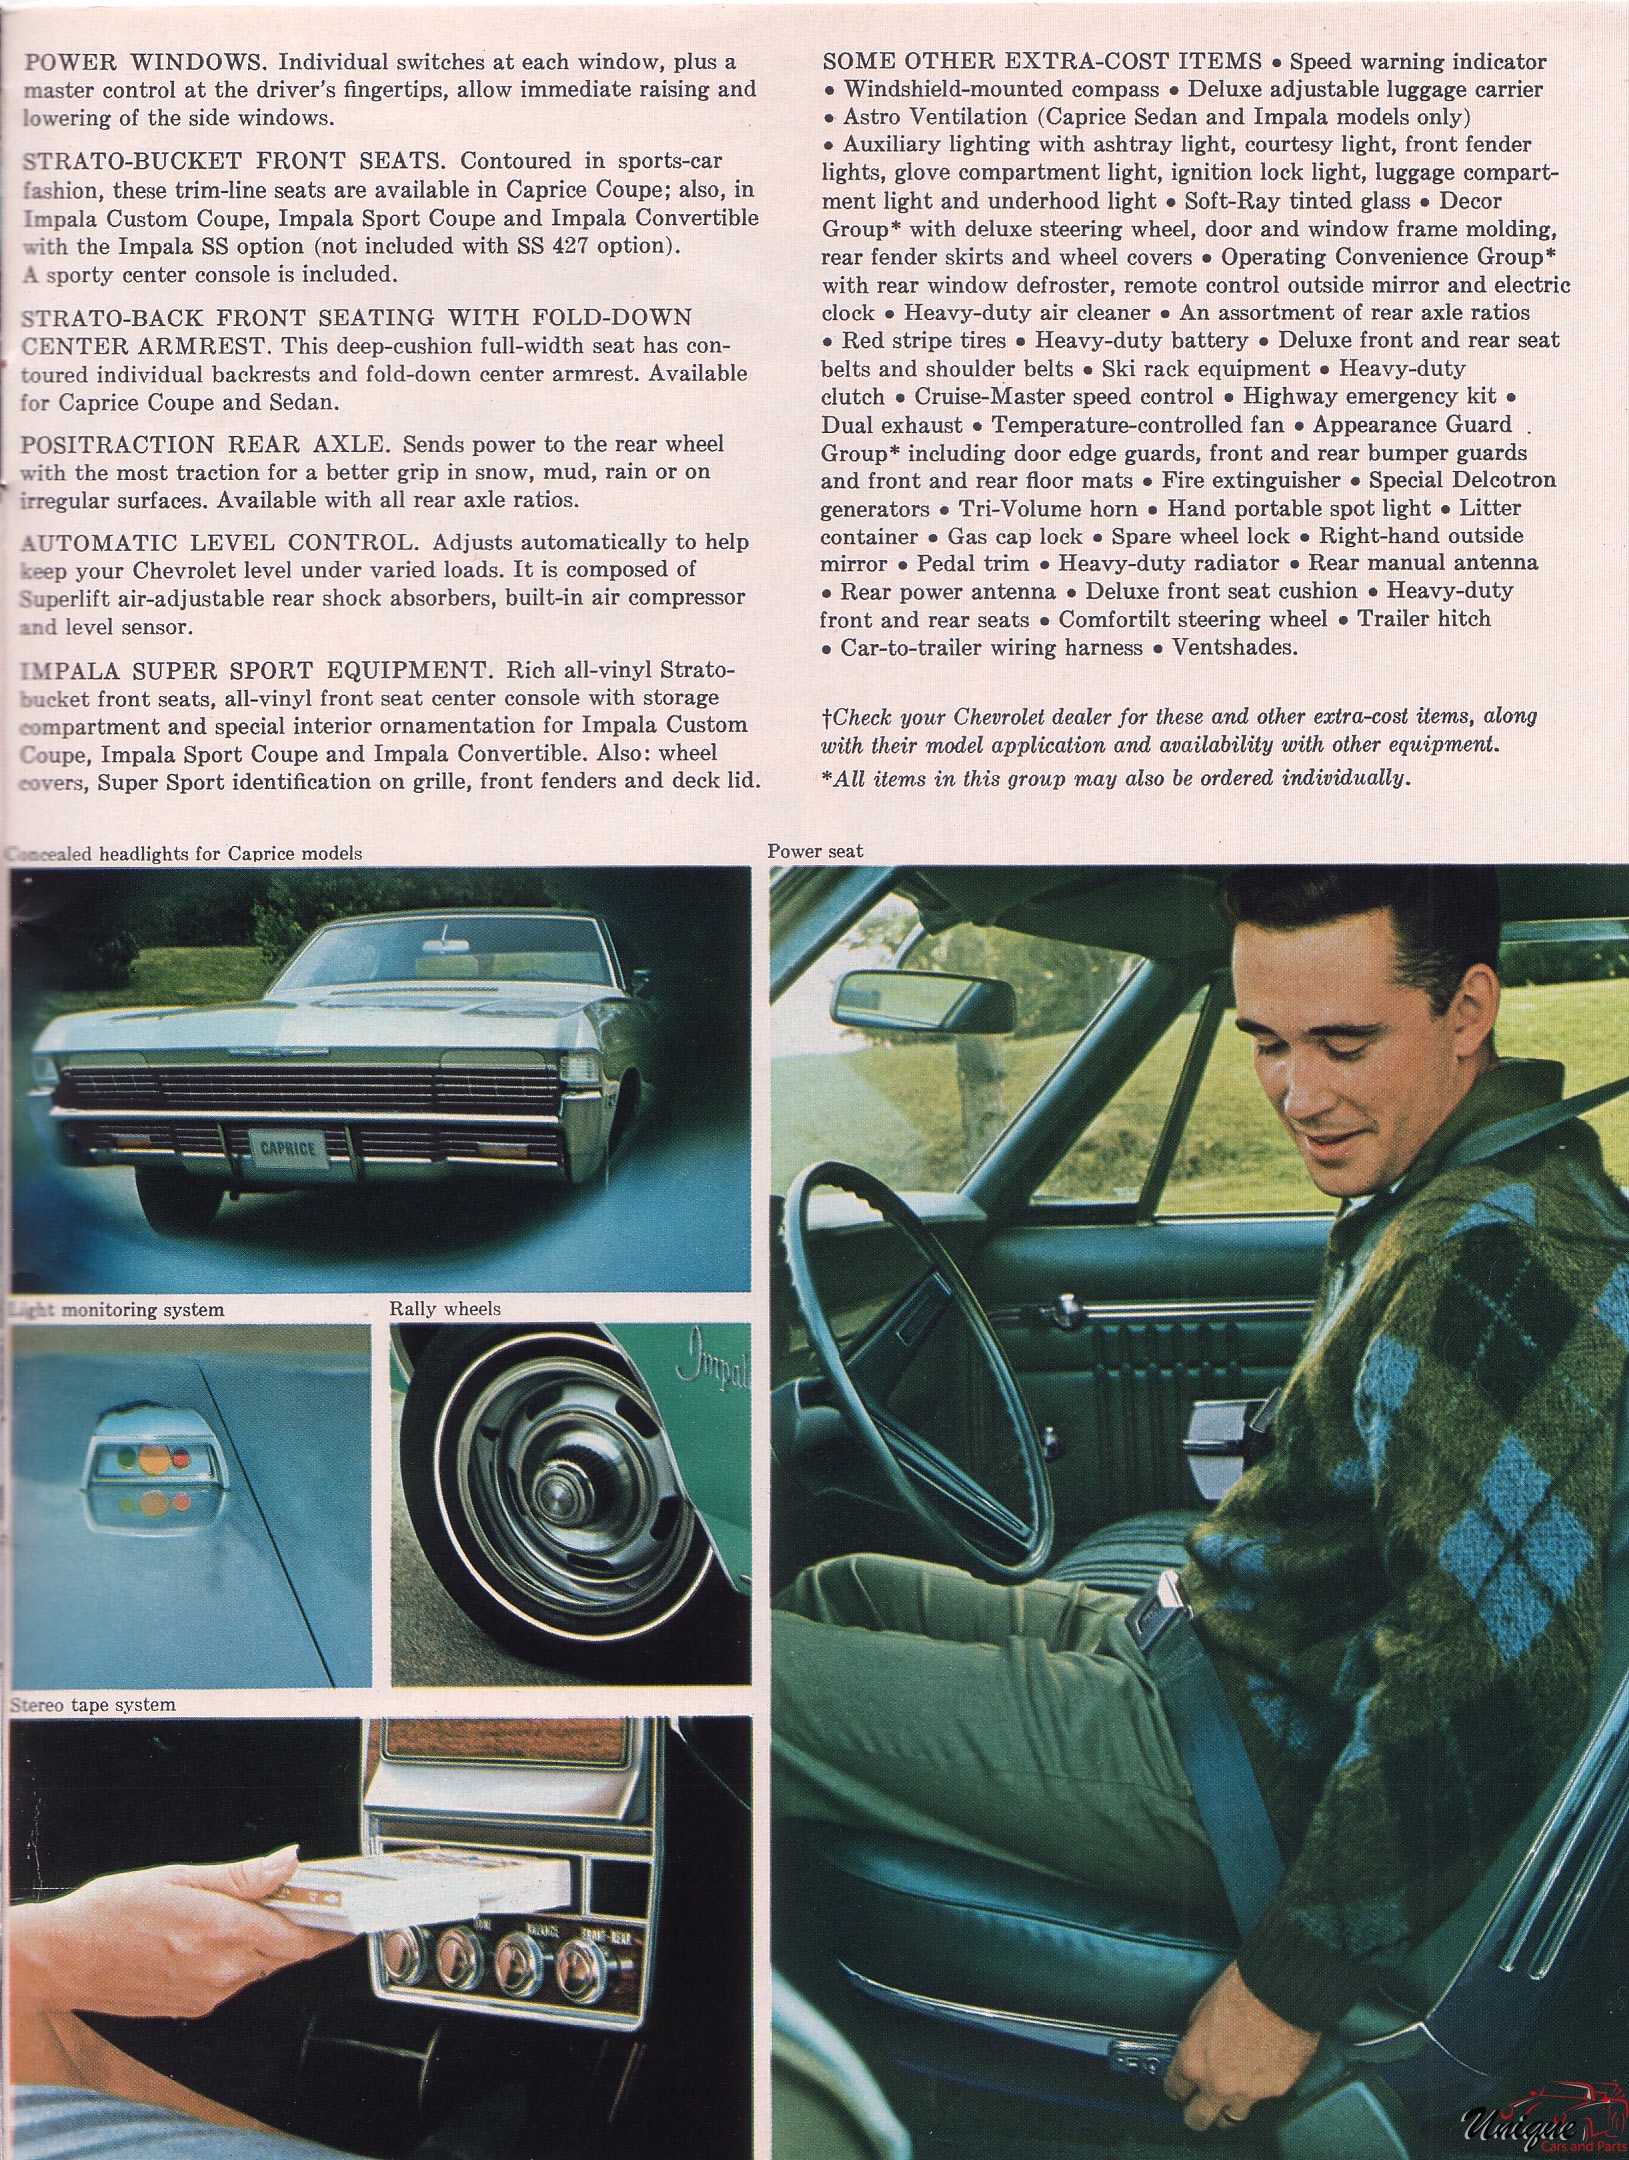 1968 Chevrolet Full-Size Brochure Page 6